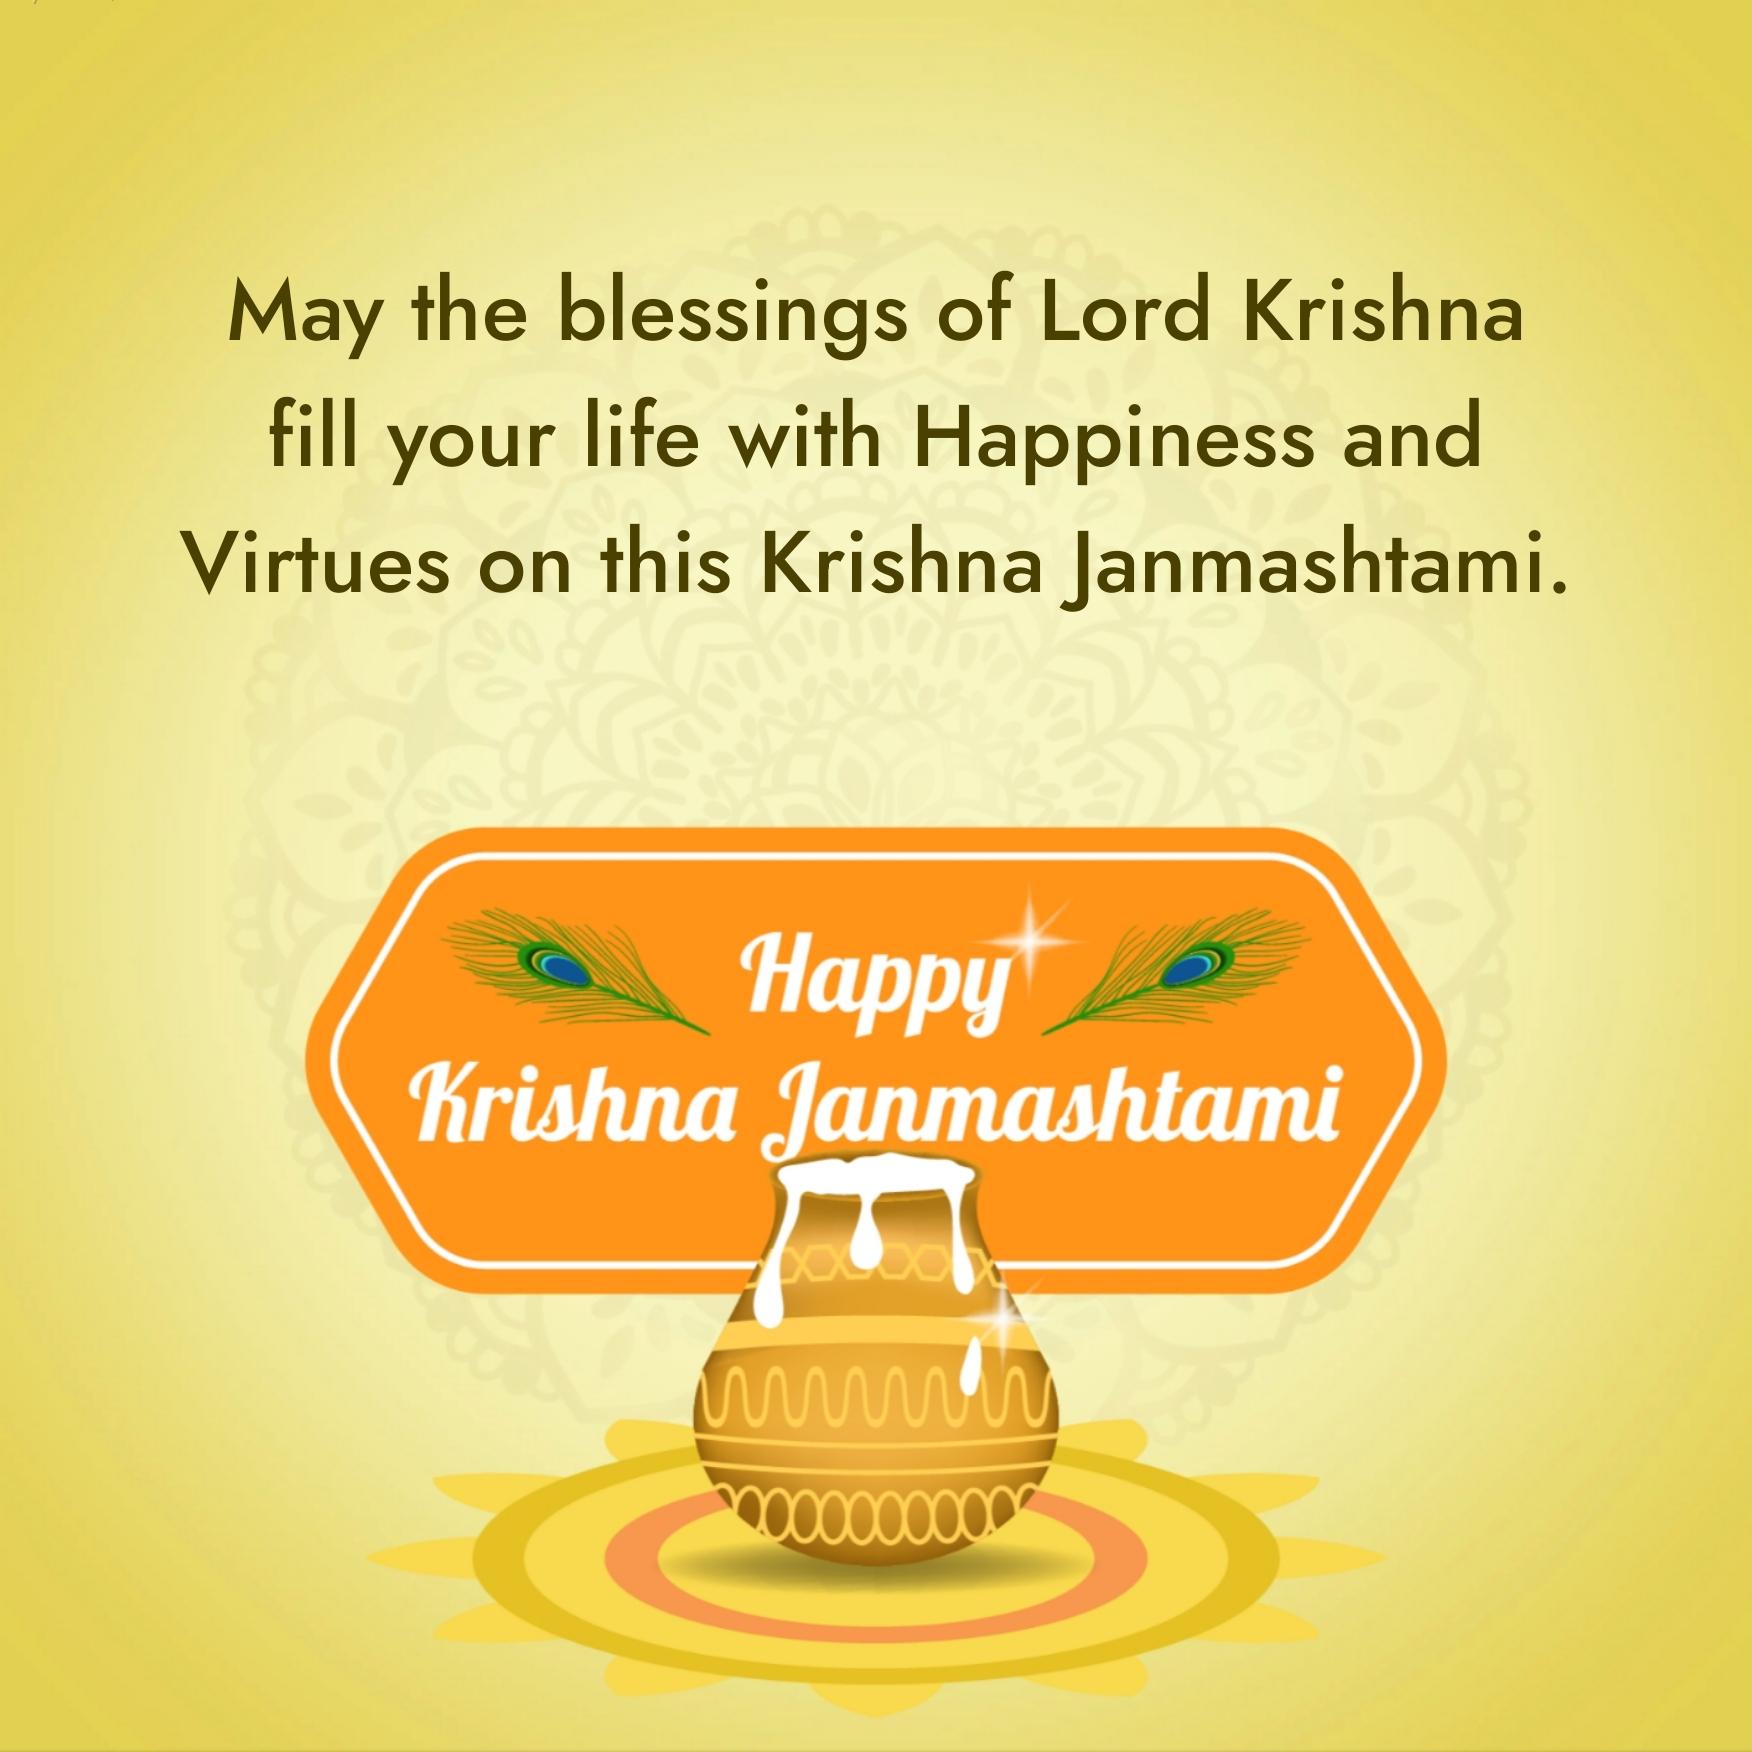 May the blessings of Lord Krishna fill your life with Happiness